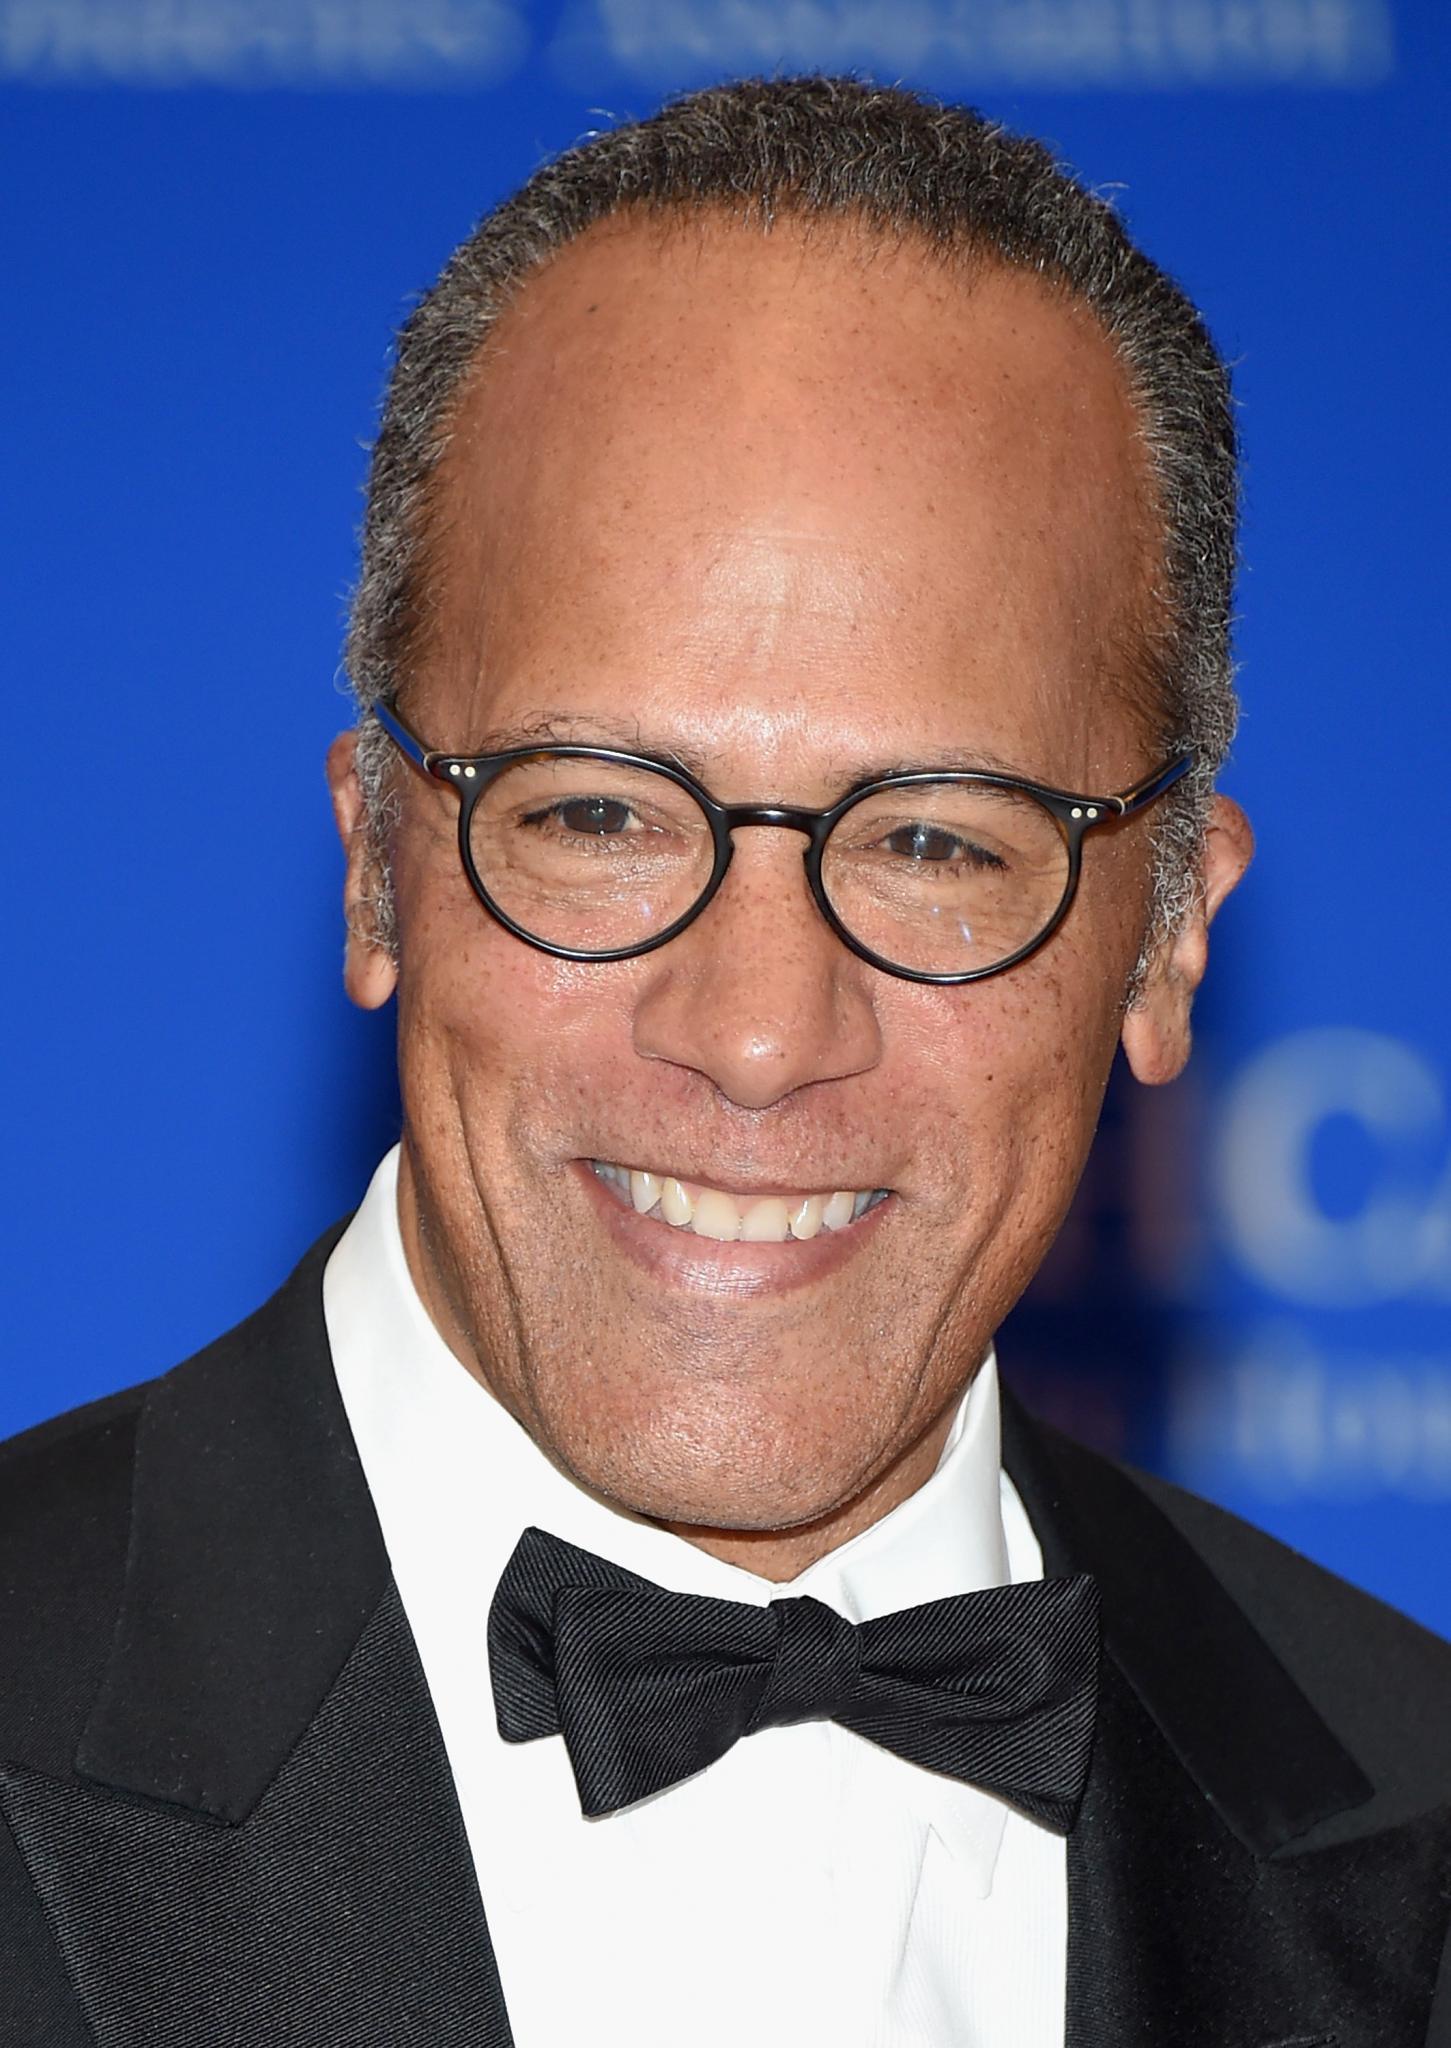 Lester Holt: ‘You Should Be Able to Turn on the TV and See People Who Look Like Those in Your Community’